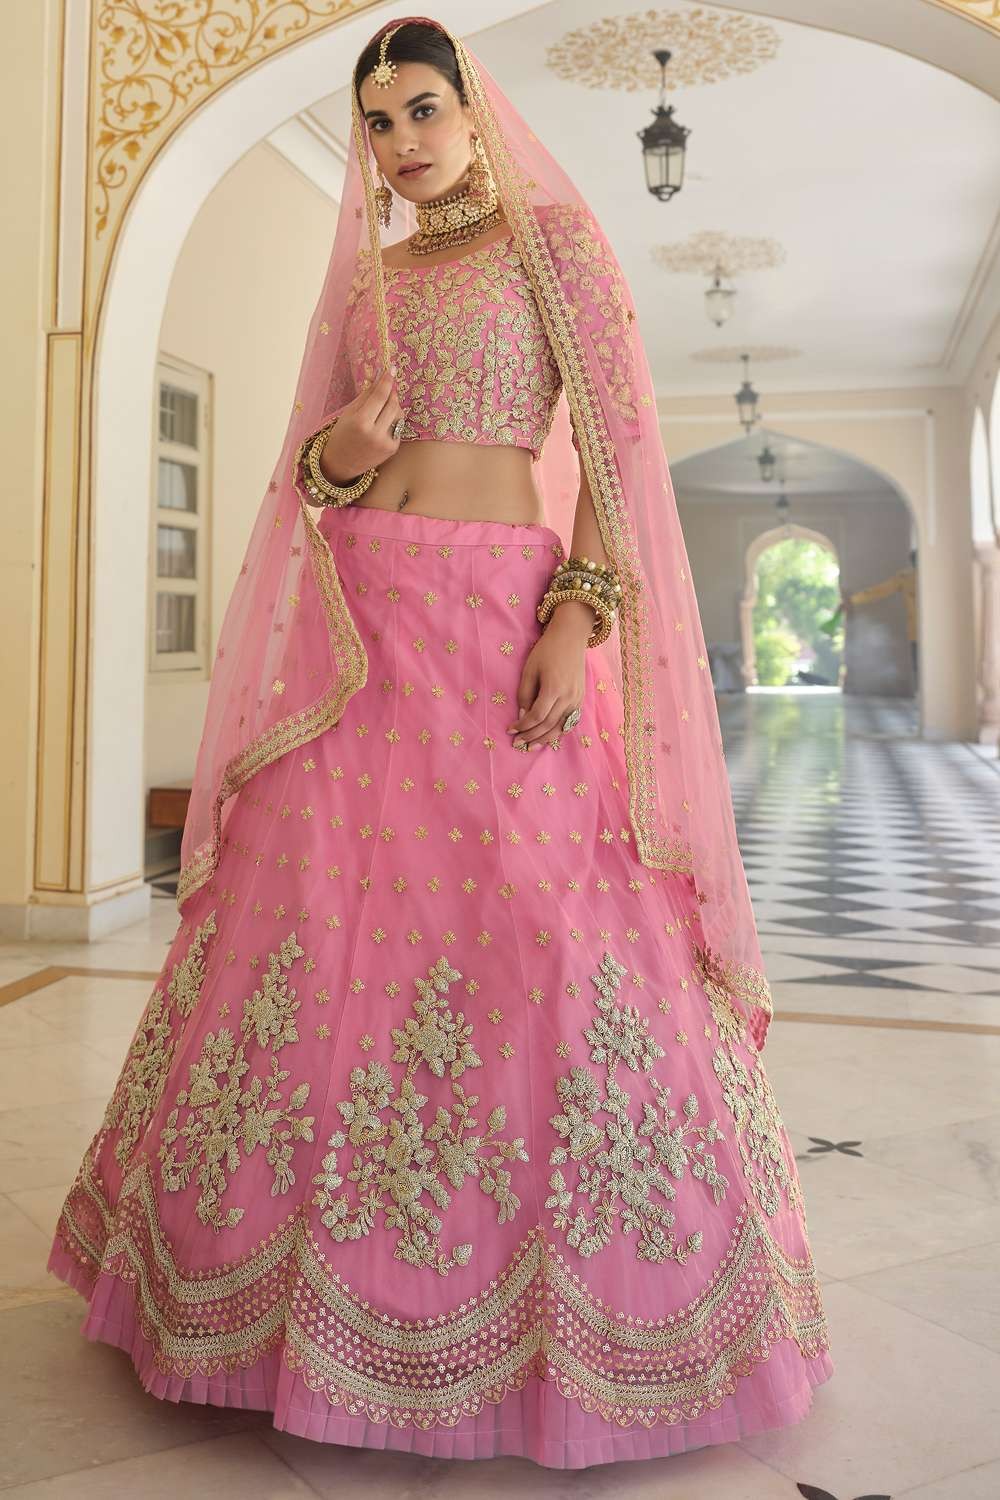 30 Different Shades Of Pink Wedding Lehengas We Loved | Pink bridal lehenga,  Pink lehenga, Bridal outfits